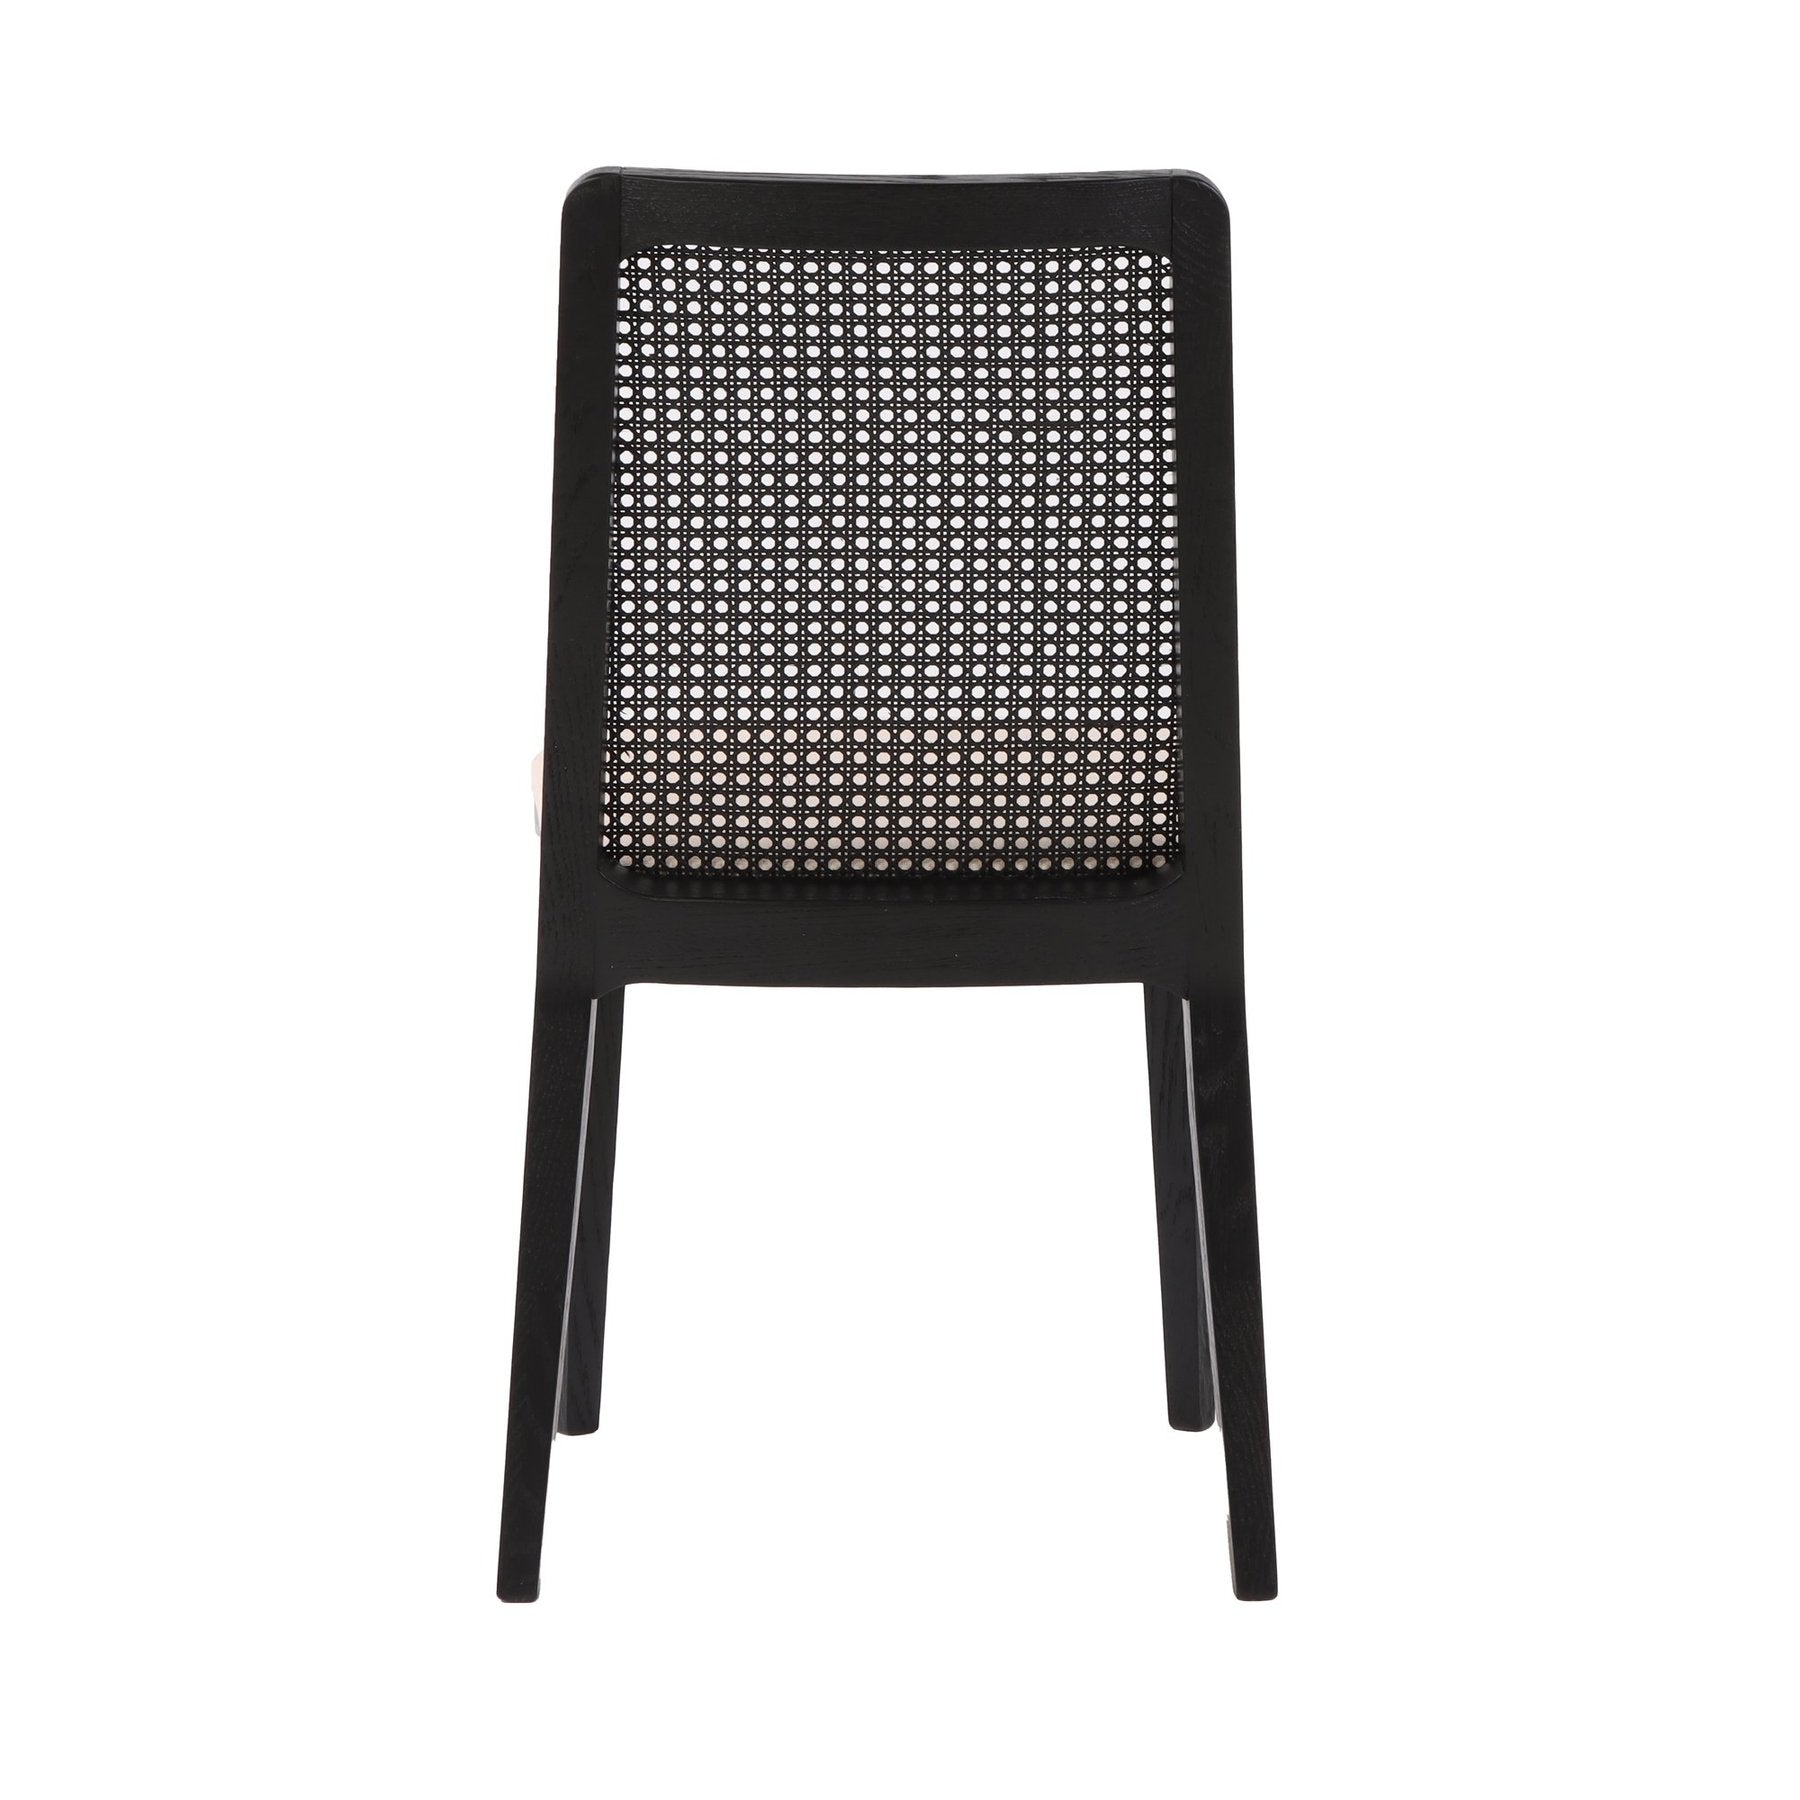 Cane Dining Chair- Oyster Linen with Black Legs